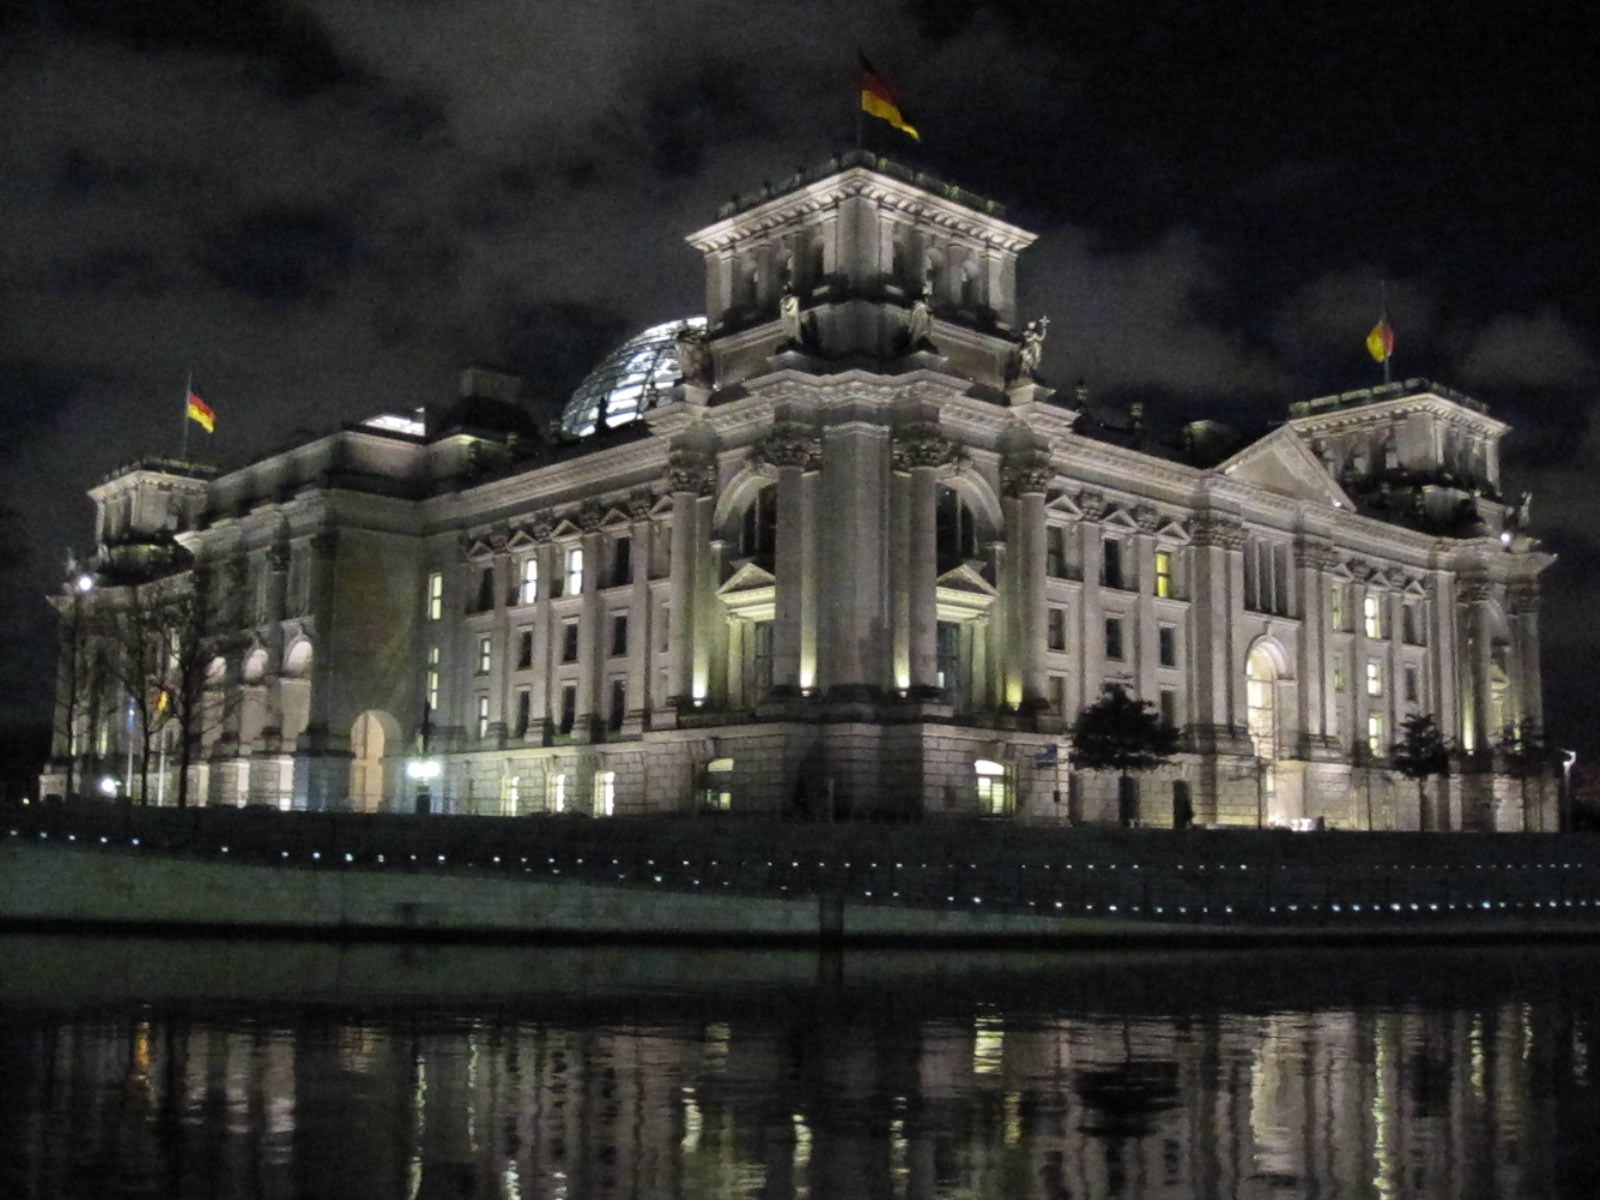 Night Back View Image Of The Reichstag Building In Berlin, Germany